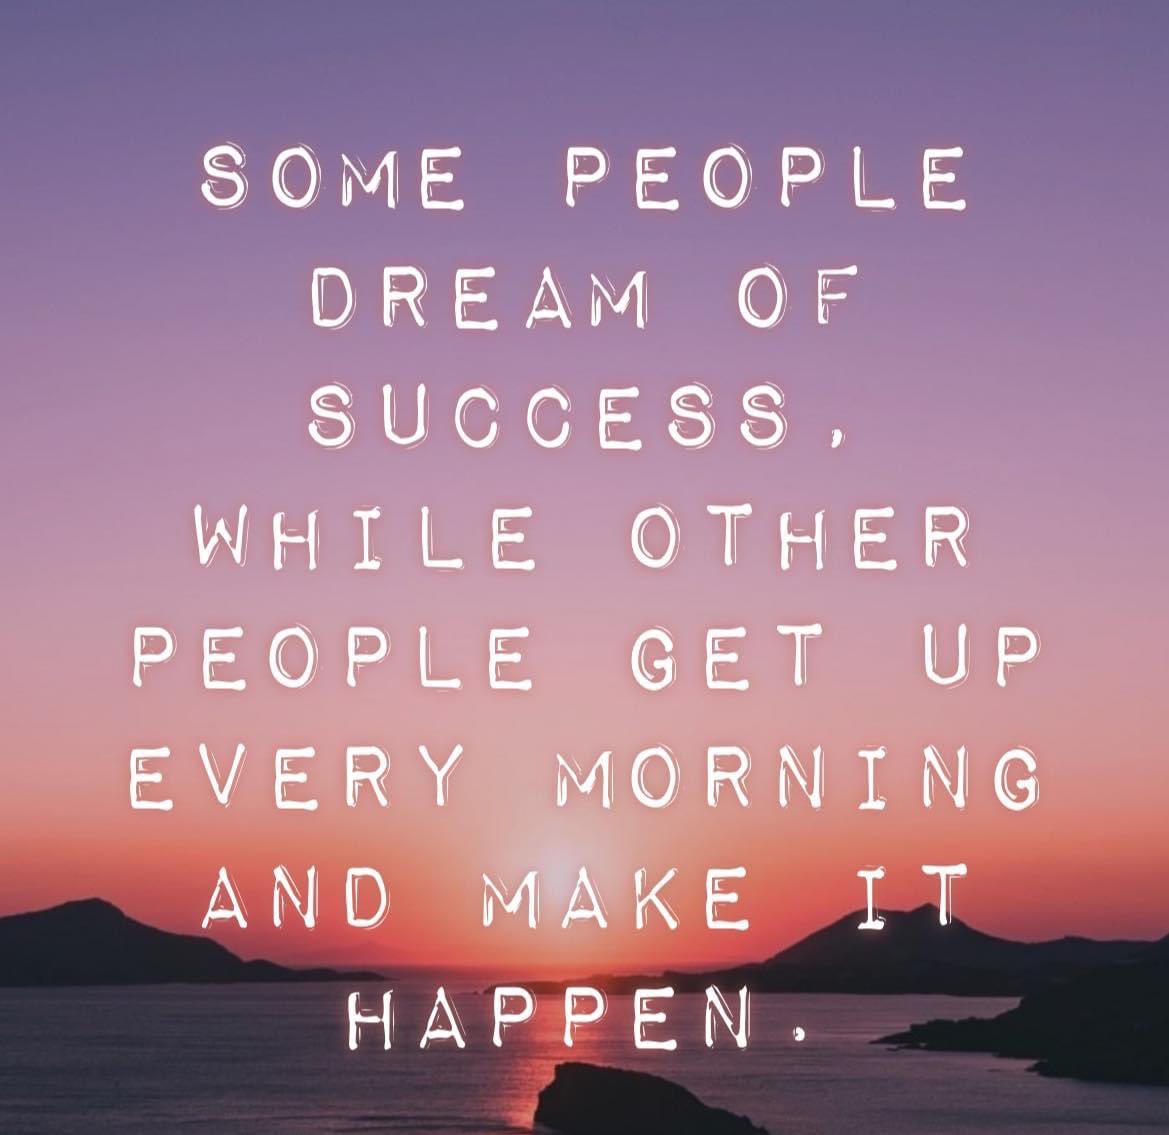 #MakeItHappenMonday🌺

Do something today that will improve the quality of your life & lead you one step closer to your dreams!
You’ve got this!☺️🏃🏼‍♀️❤️
#HPE #Empowerment #SHAPEVirtual 

@MOSHAPE1 @SHAPE_America @ElemPE1 @kristibieri @GuyDanhoff @kniper1